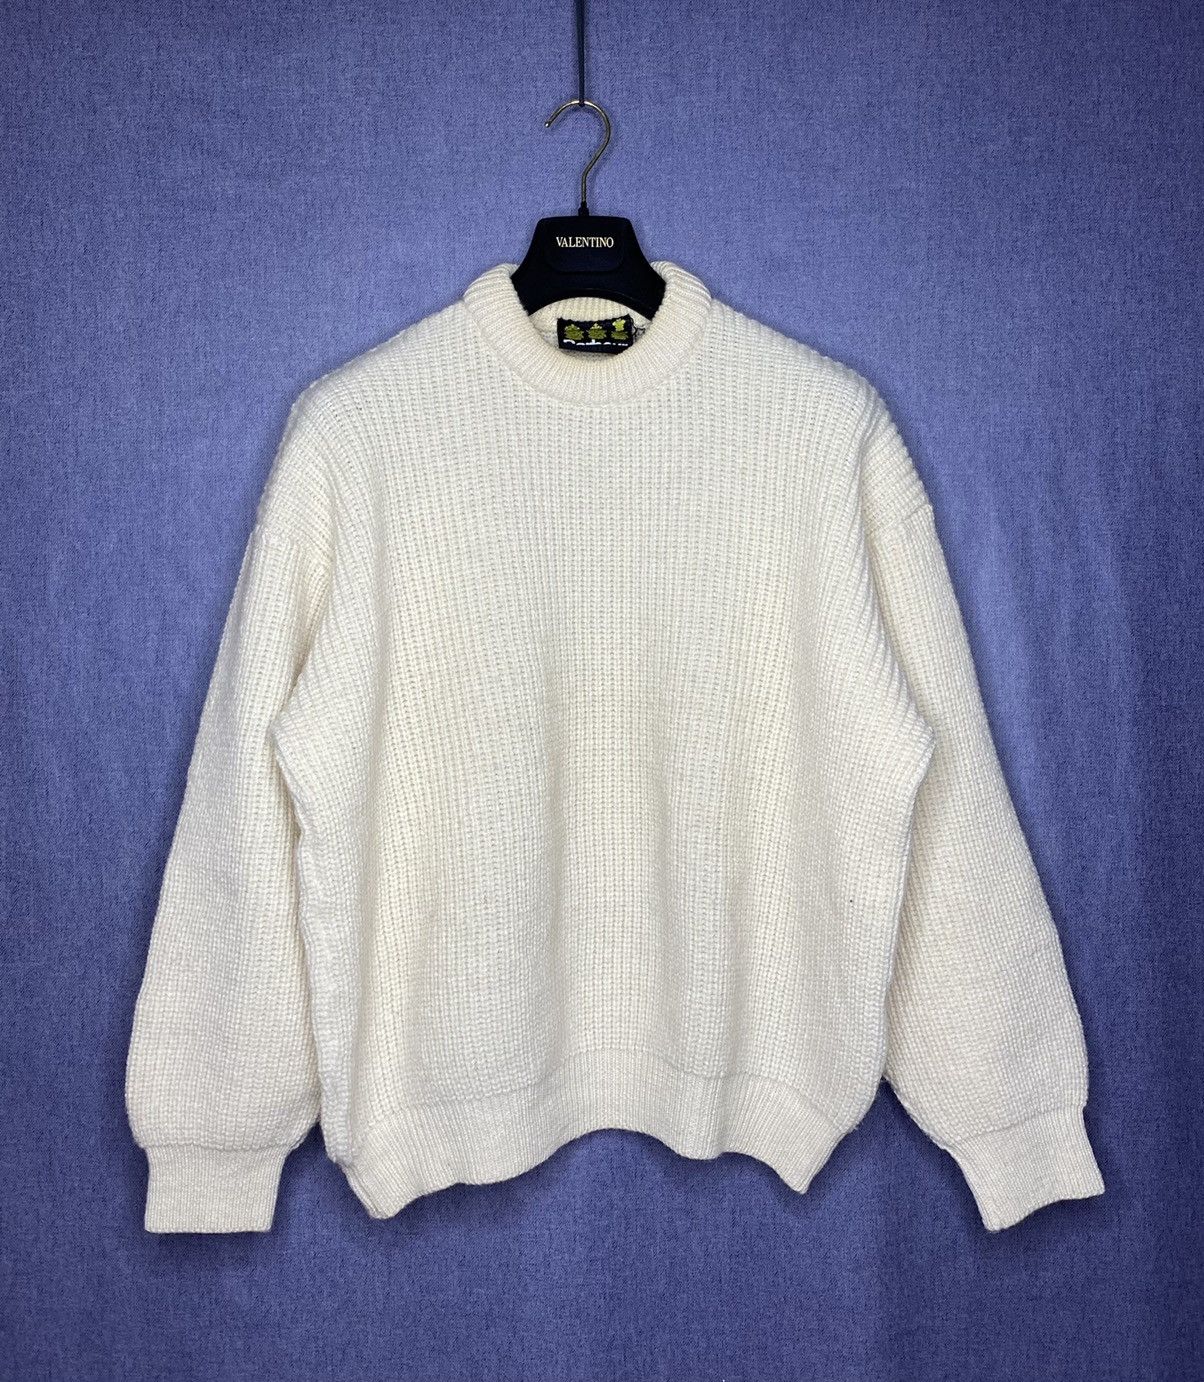 Barbour Barbour Vintage 80s Fisherman Knitted Sweater Wool Rare Size US L / EU 52-54 / 3 - 1 Preview